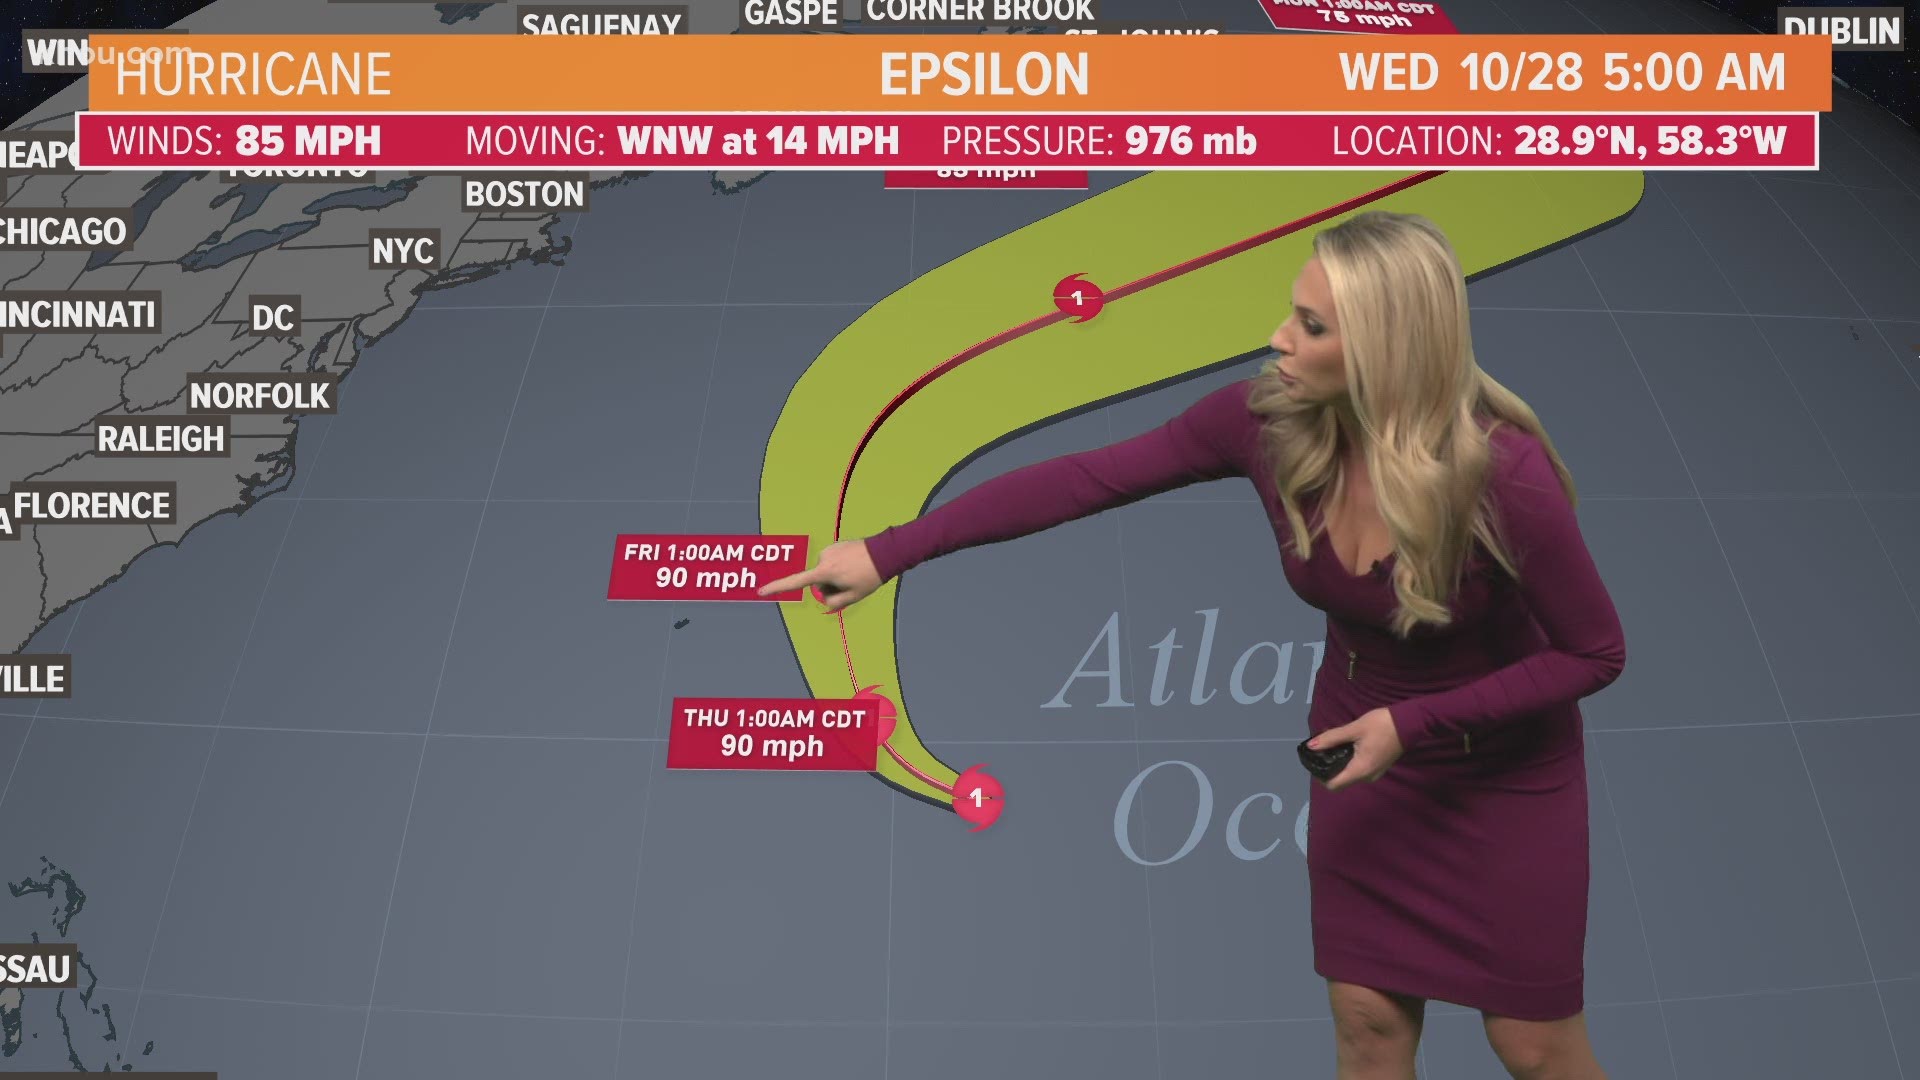 Meteorologist Chita Craft has a quick look at the tropics and Houston's weather forecast